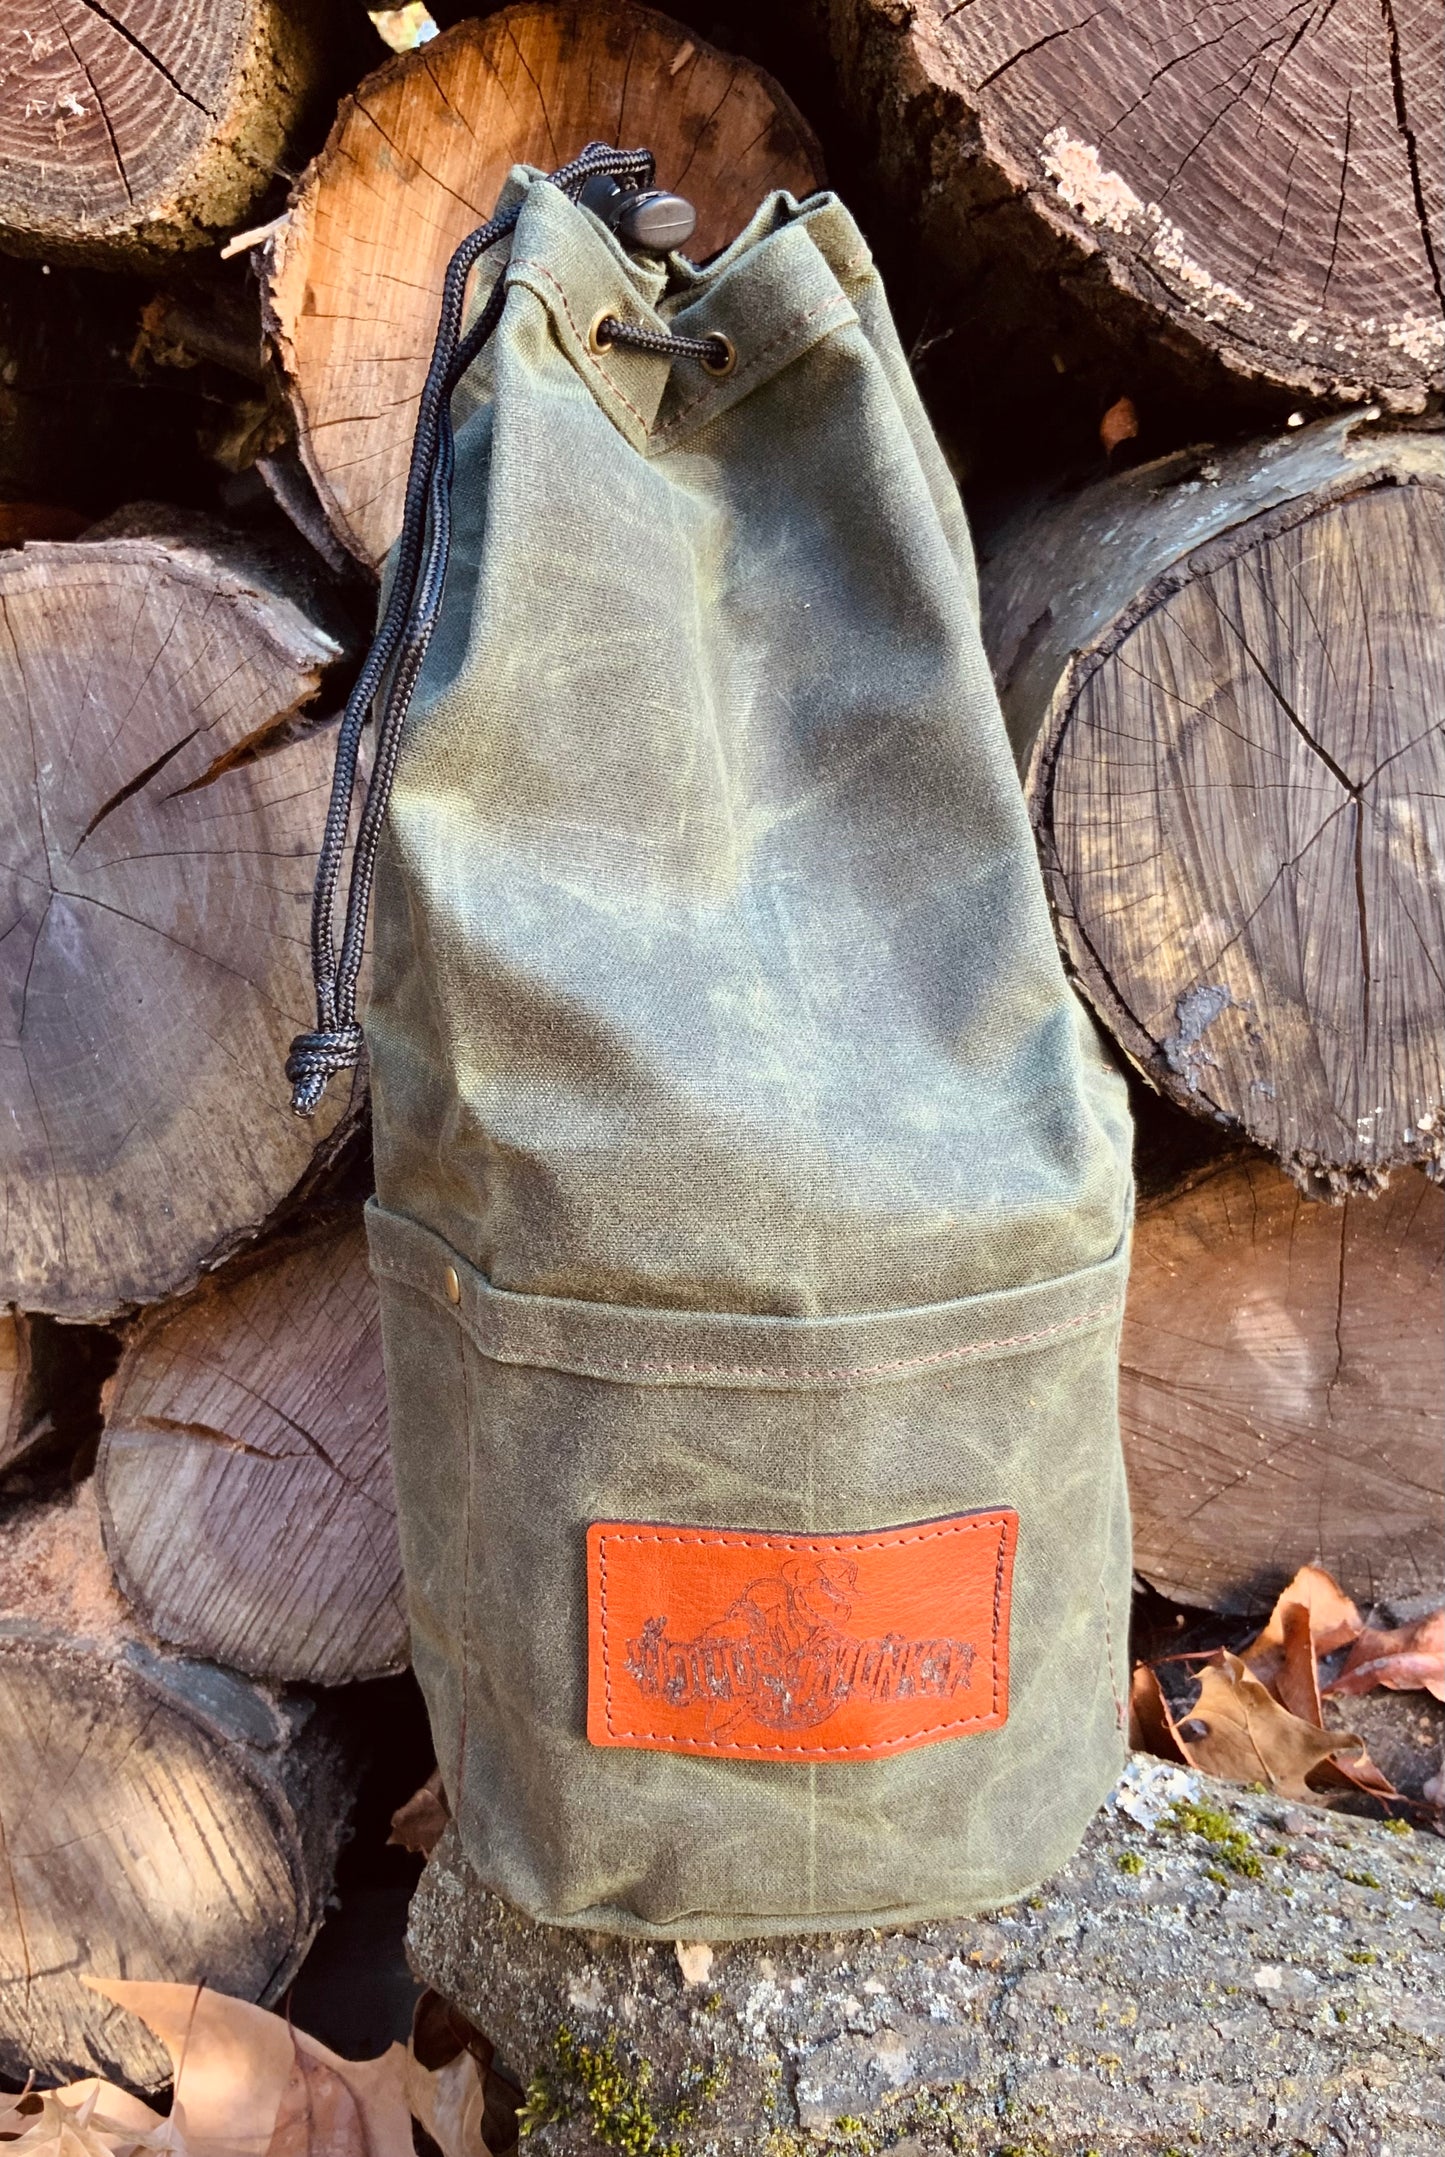 Bushcrafting canvas bag for personal items